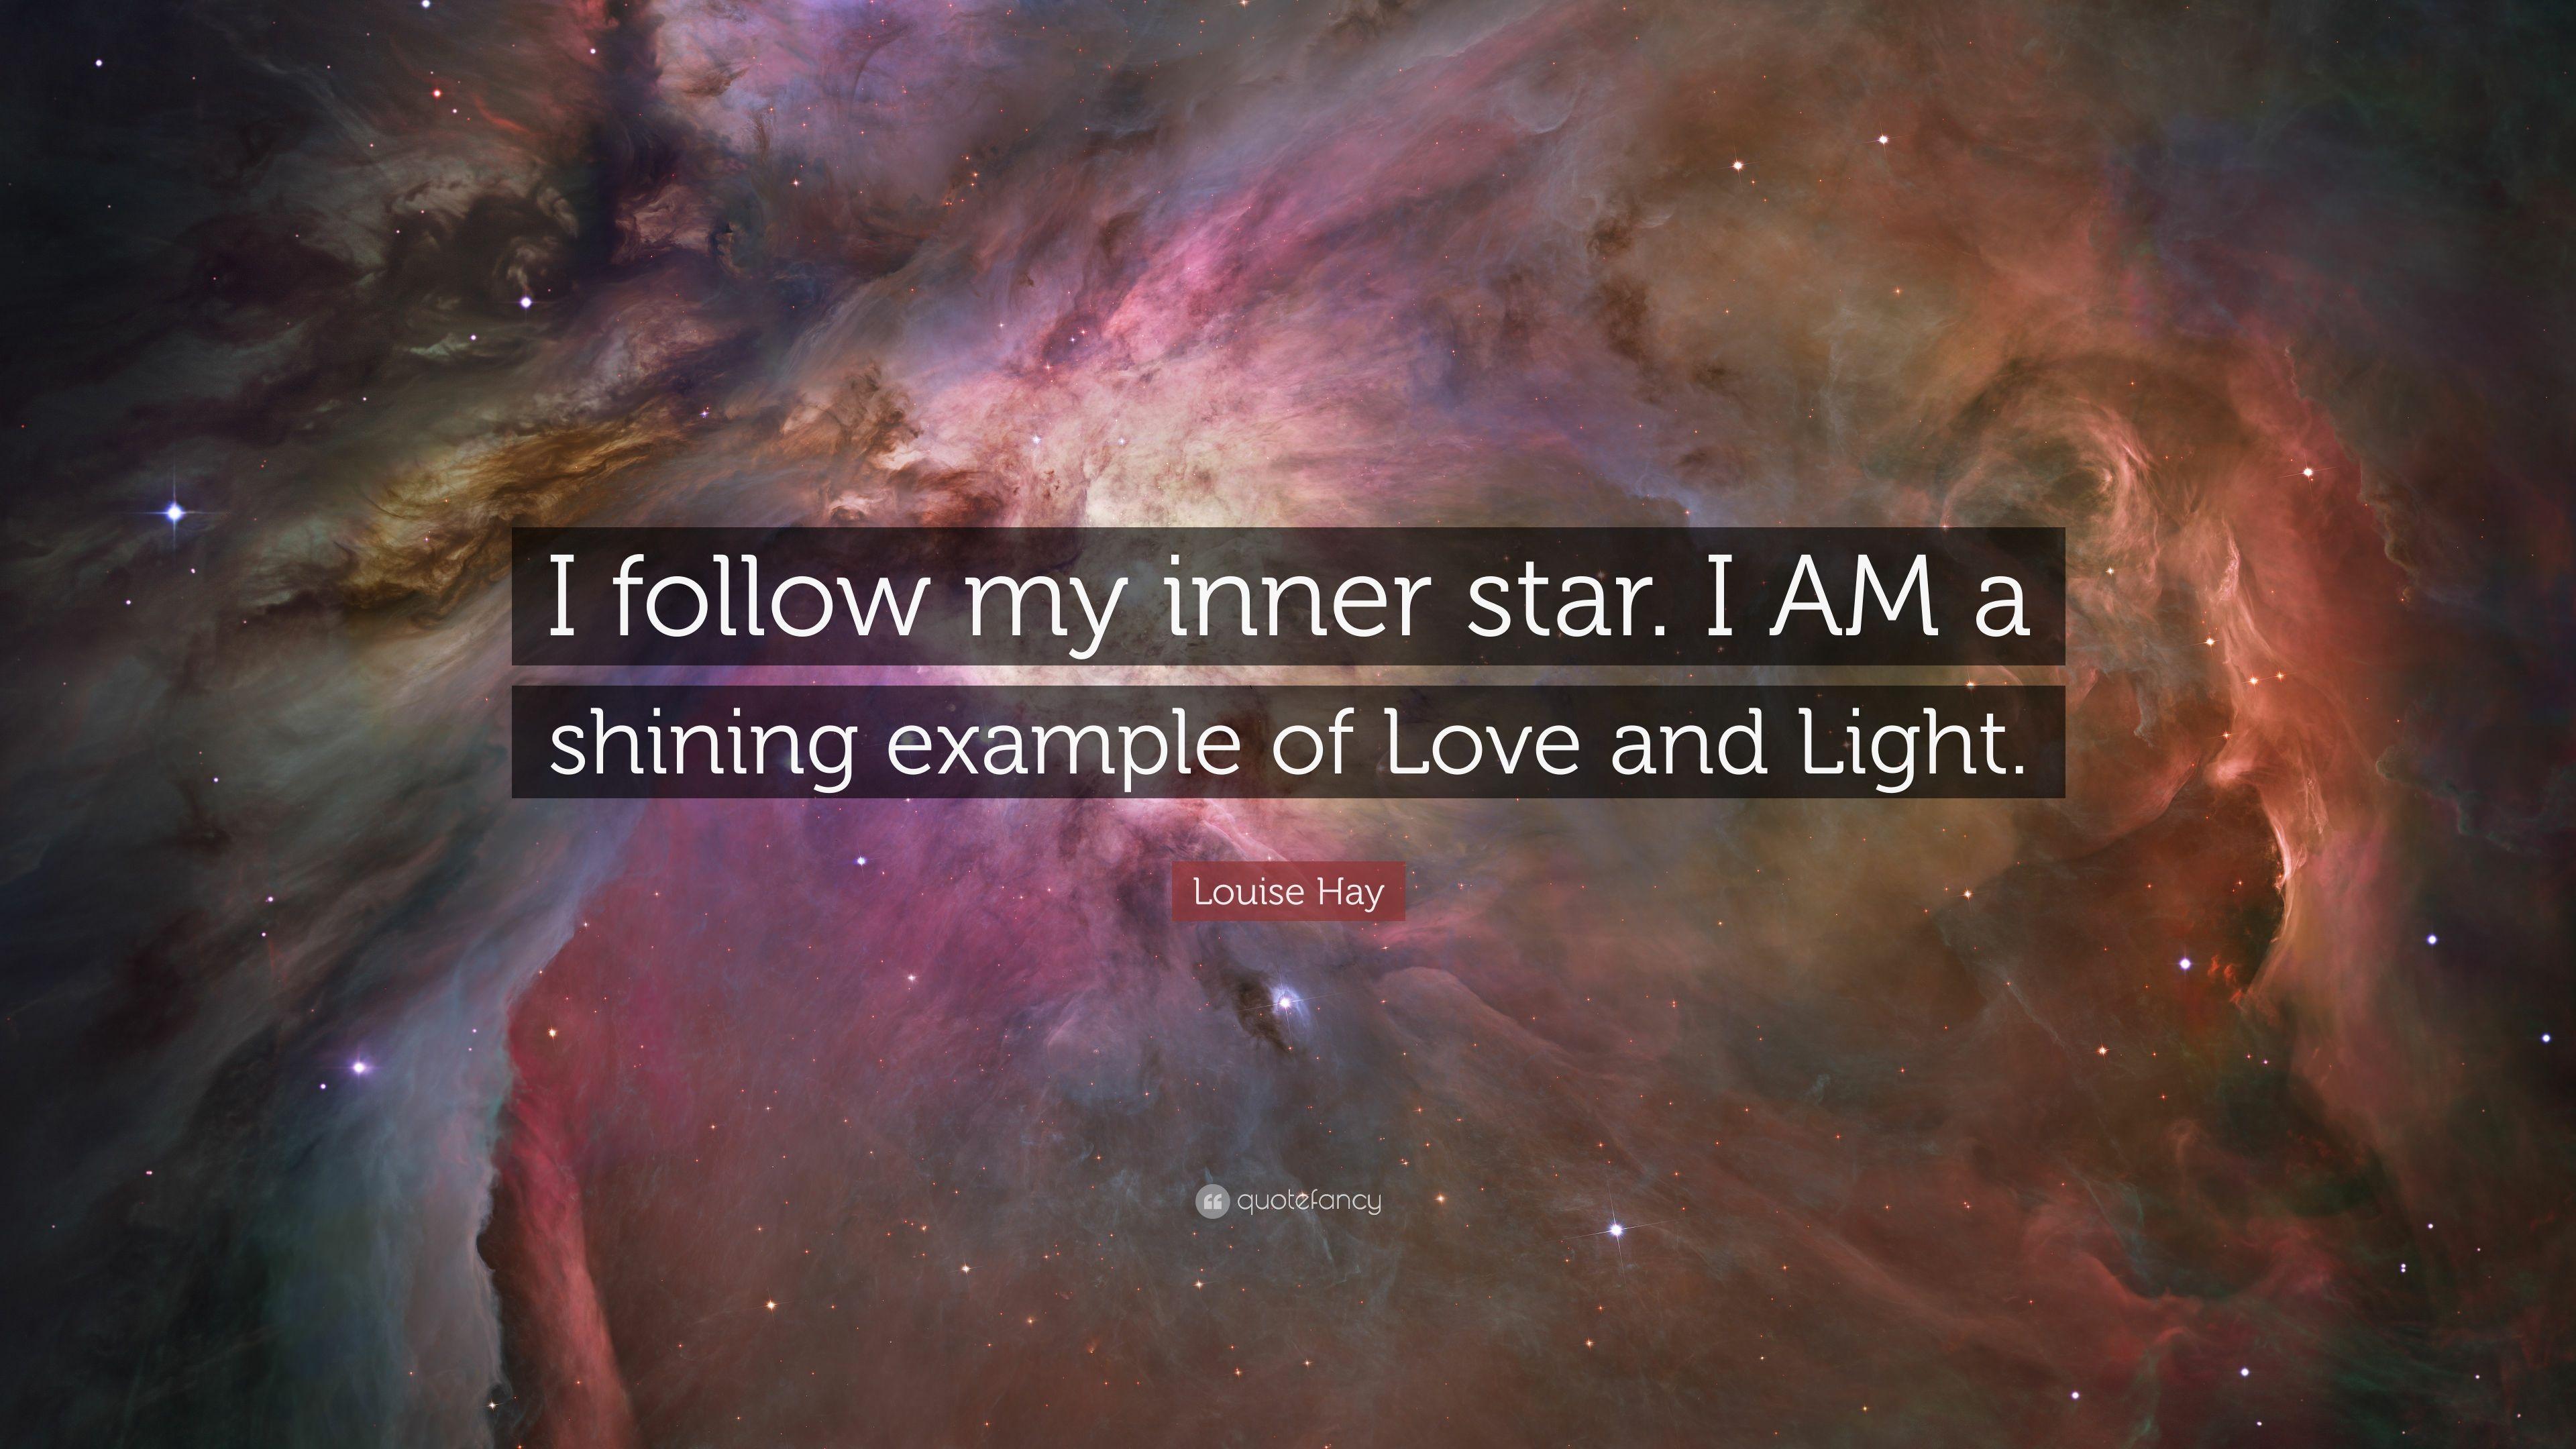 Louise Hay Quote: “I follow my inner star. I AM a shining example